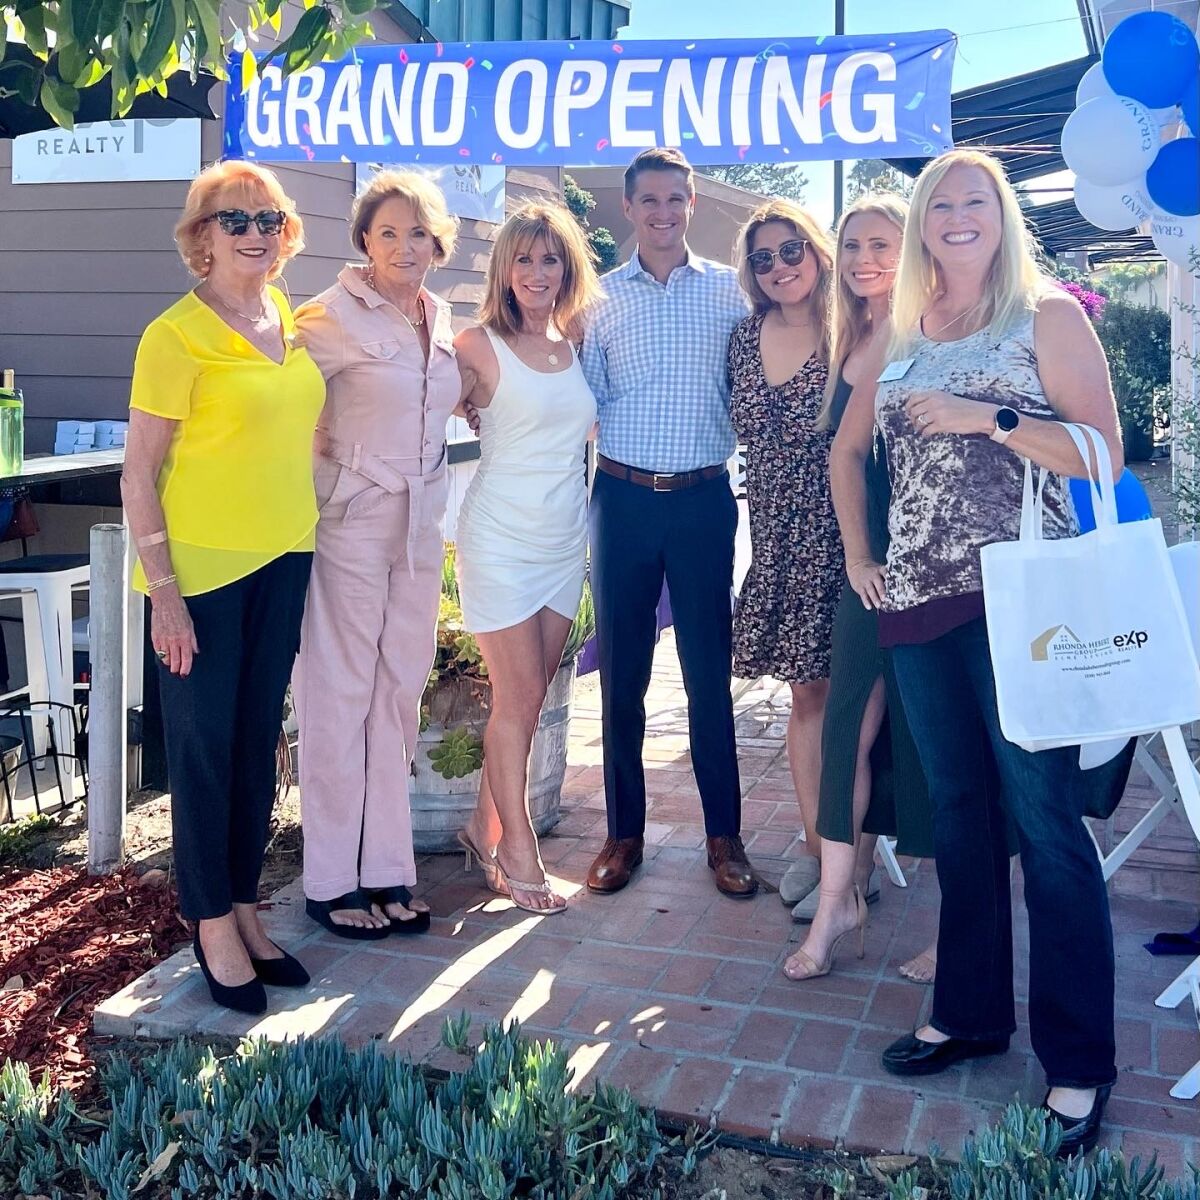 The Solana Beach Chamber of Commerce, Lifetime Water owner Robin Colvey and Rhonda Hebert Group Fine Living